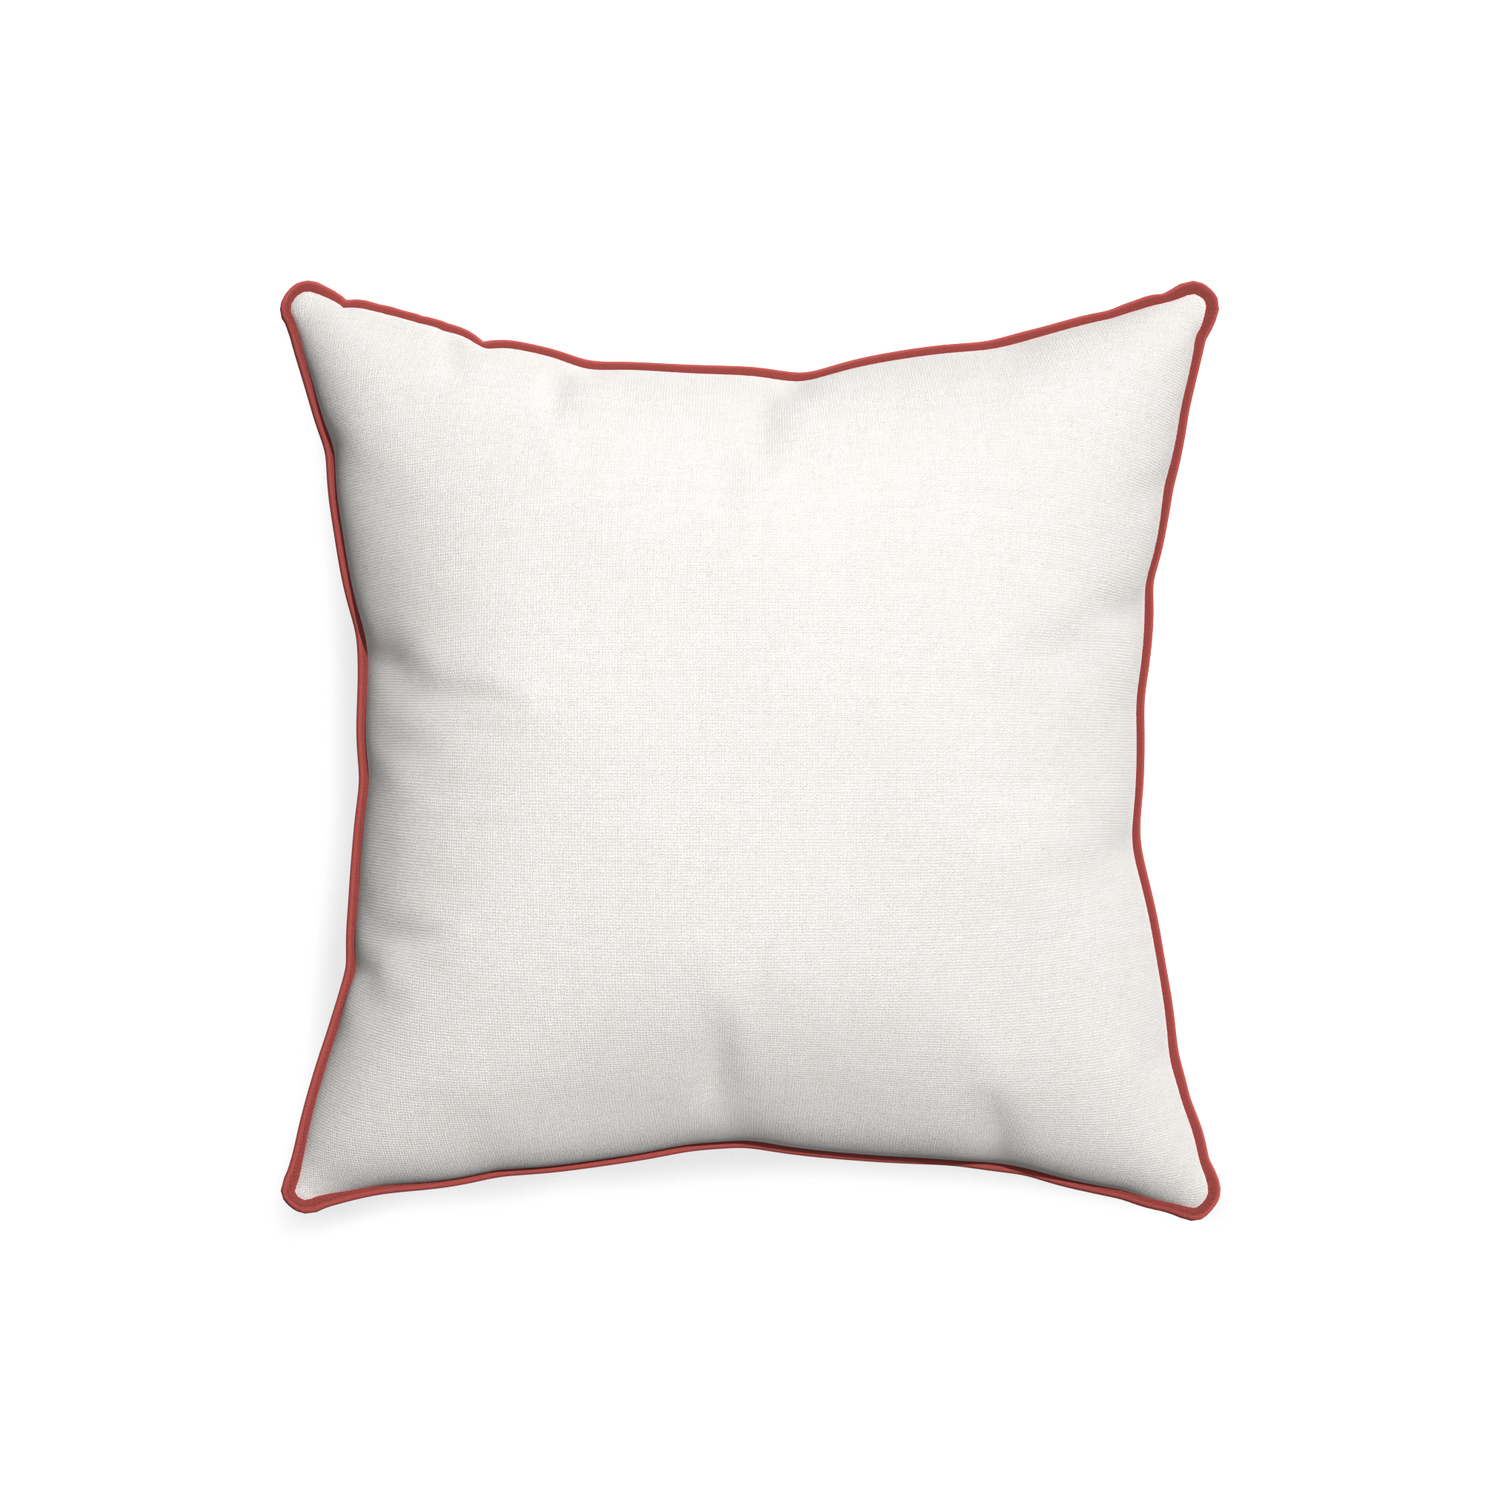 20-square flour custom pillow with c piping on white background